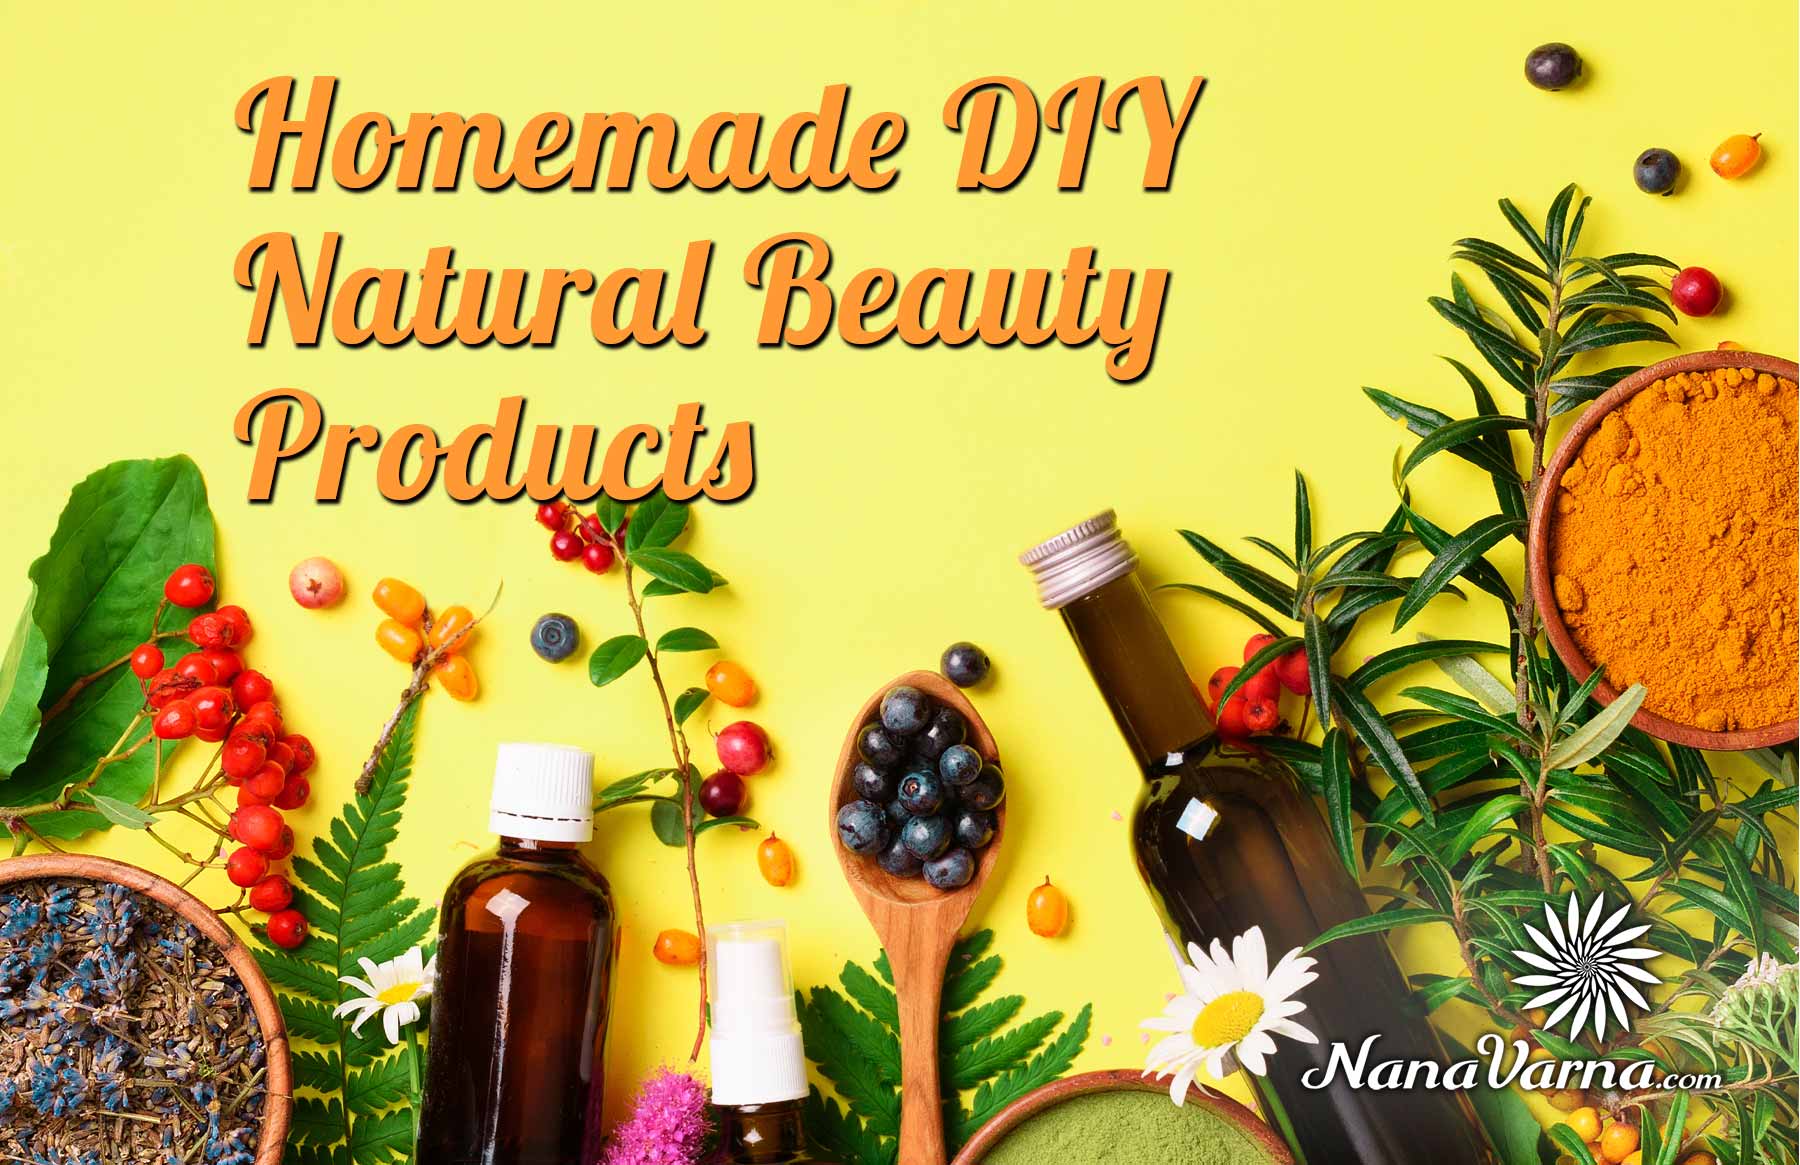 Natural beauty products